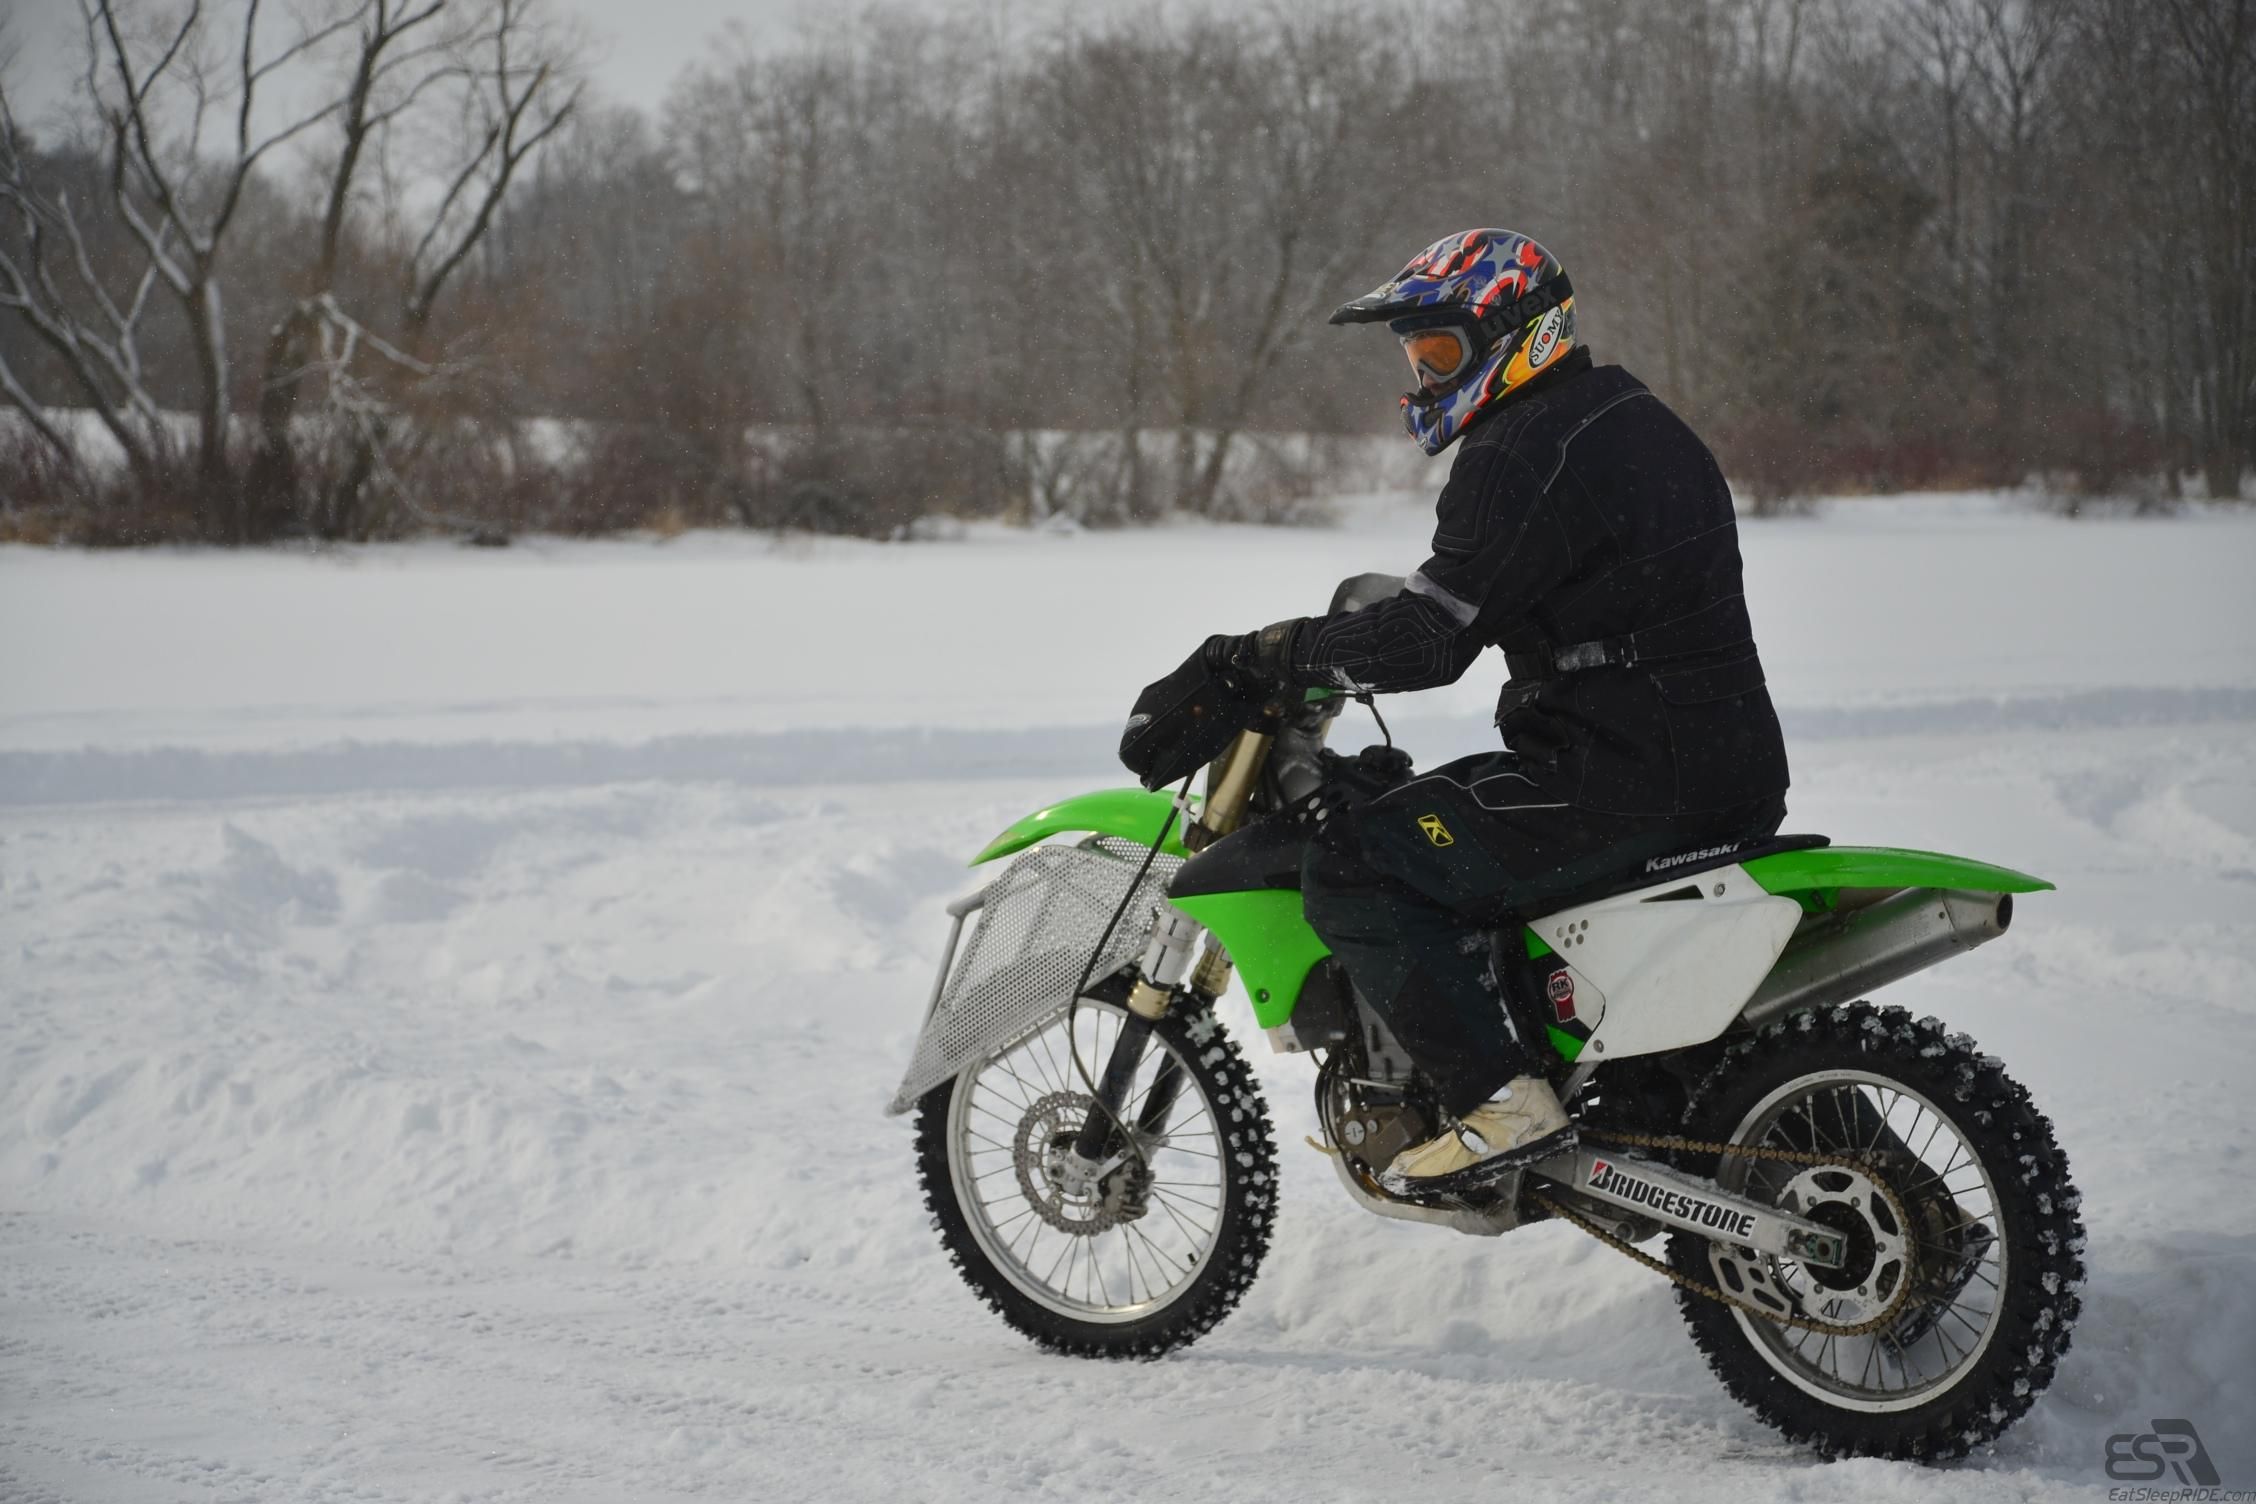 #89 Back on the bike - Ice riding